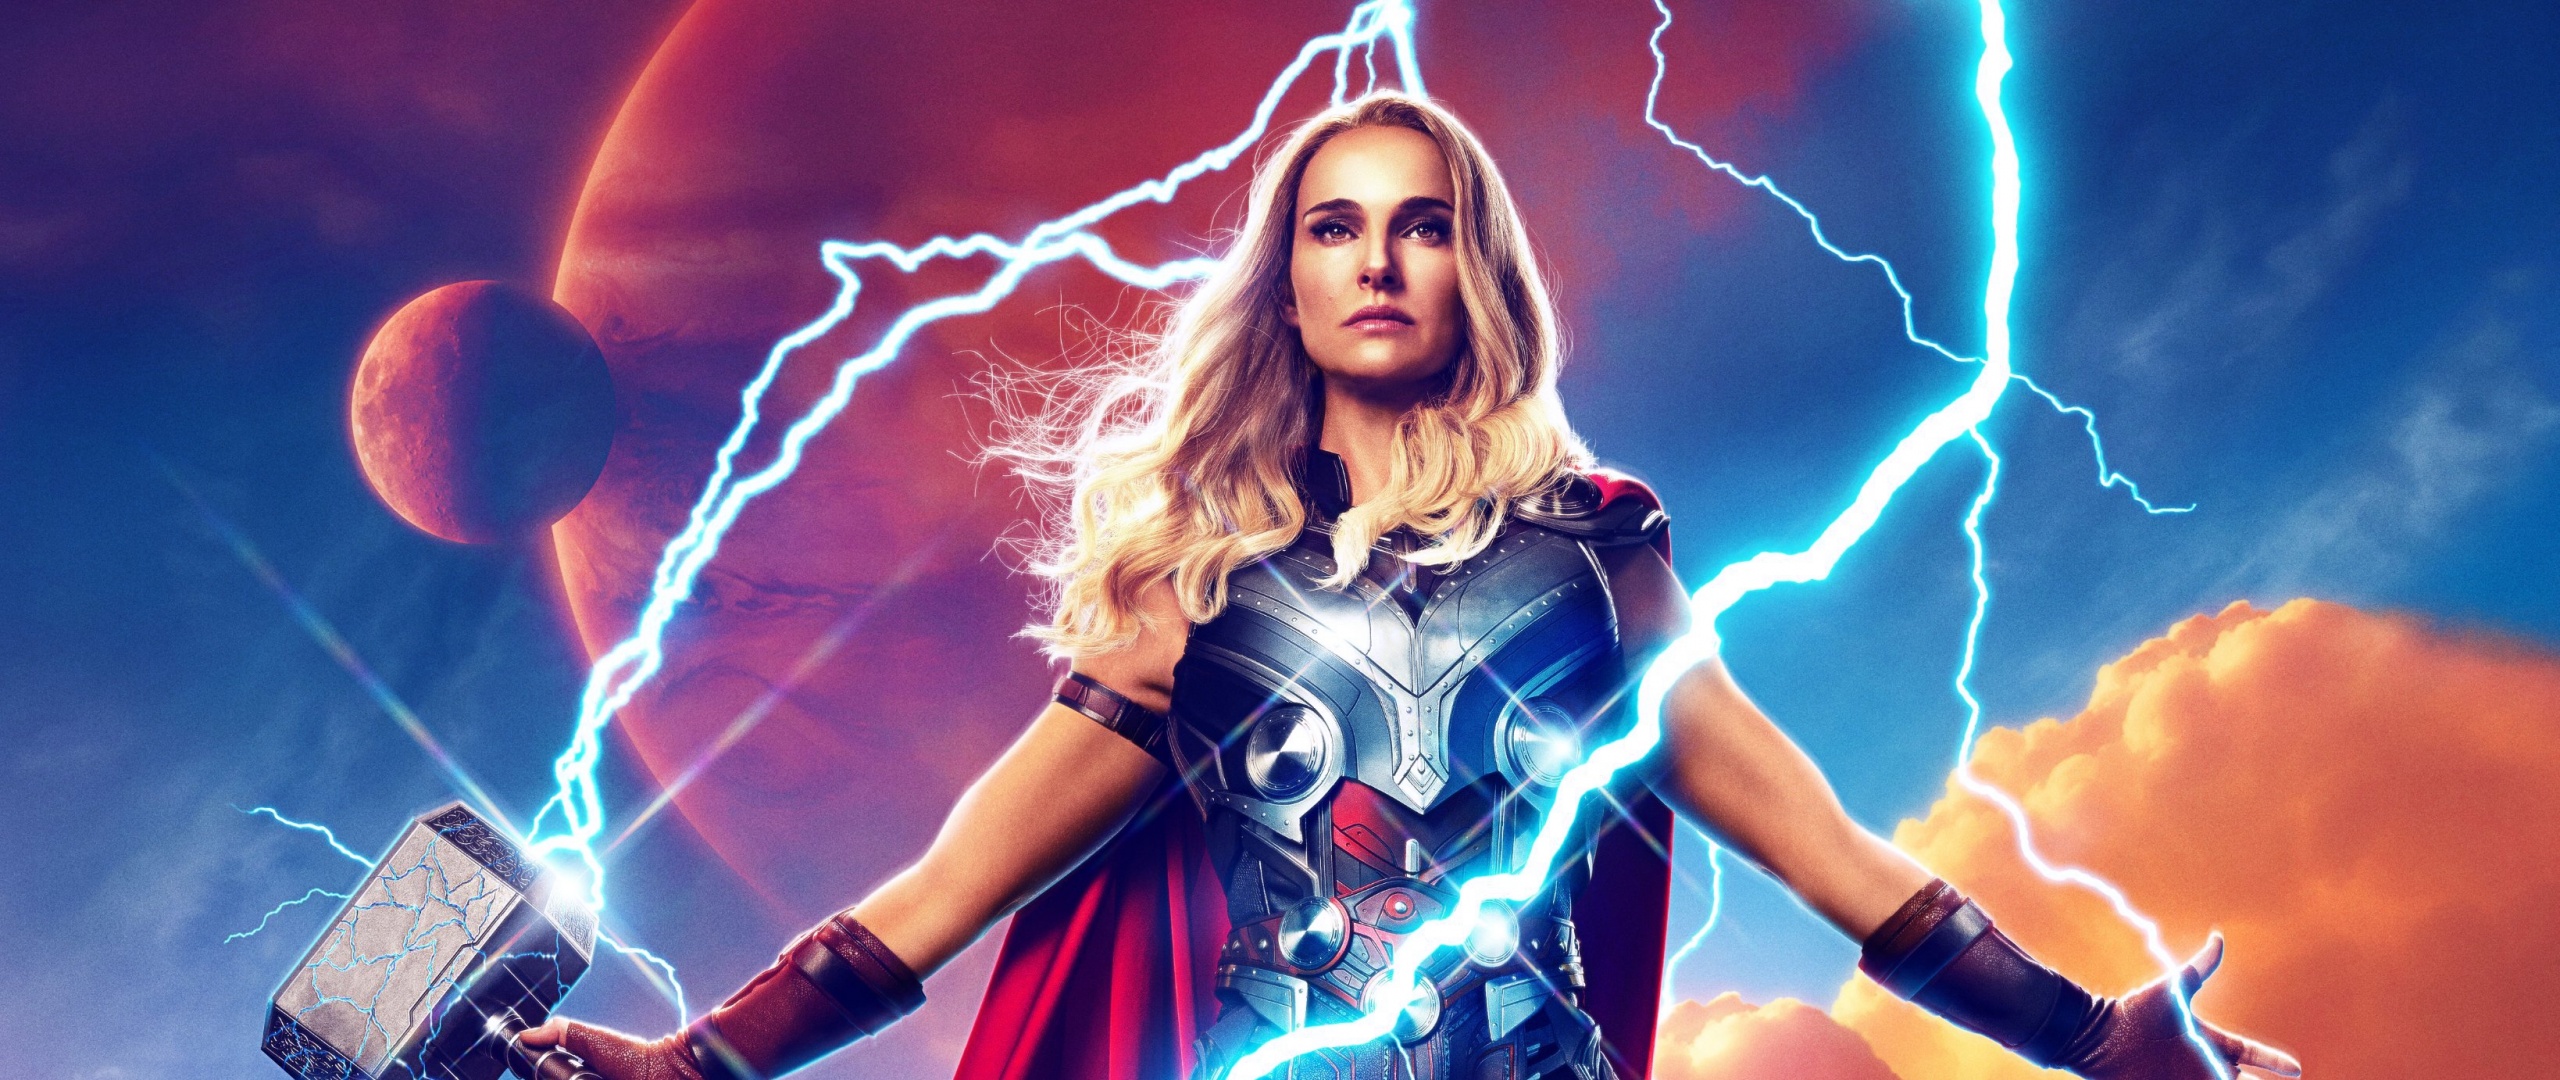 Thor: Love and Thunder Wallpaper 4K, Movies, #8160